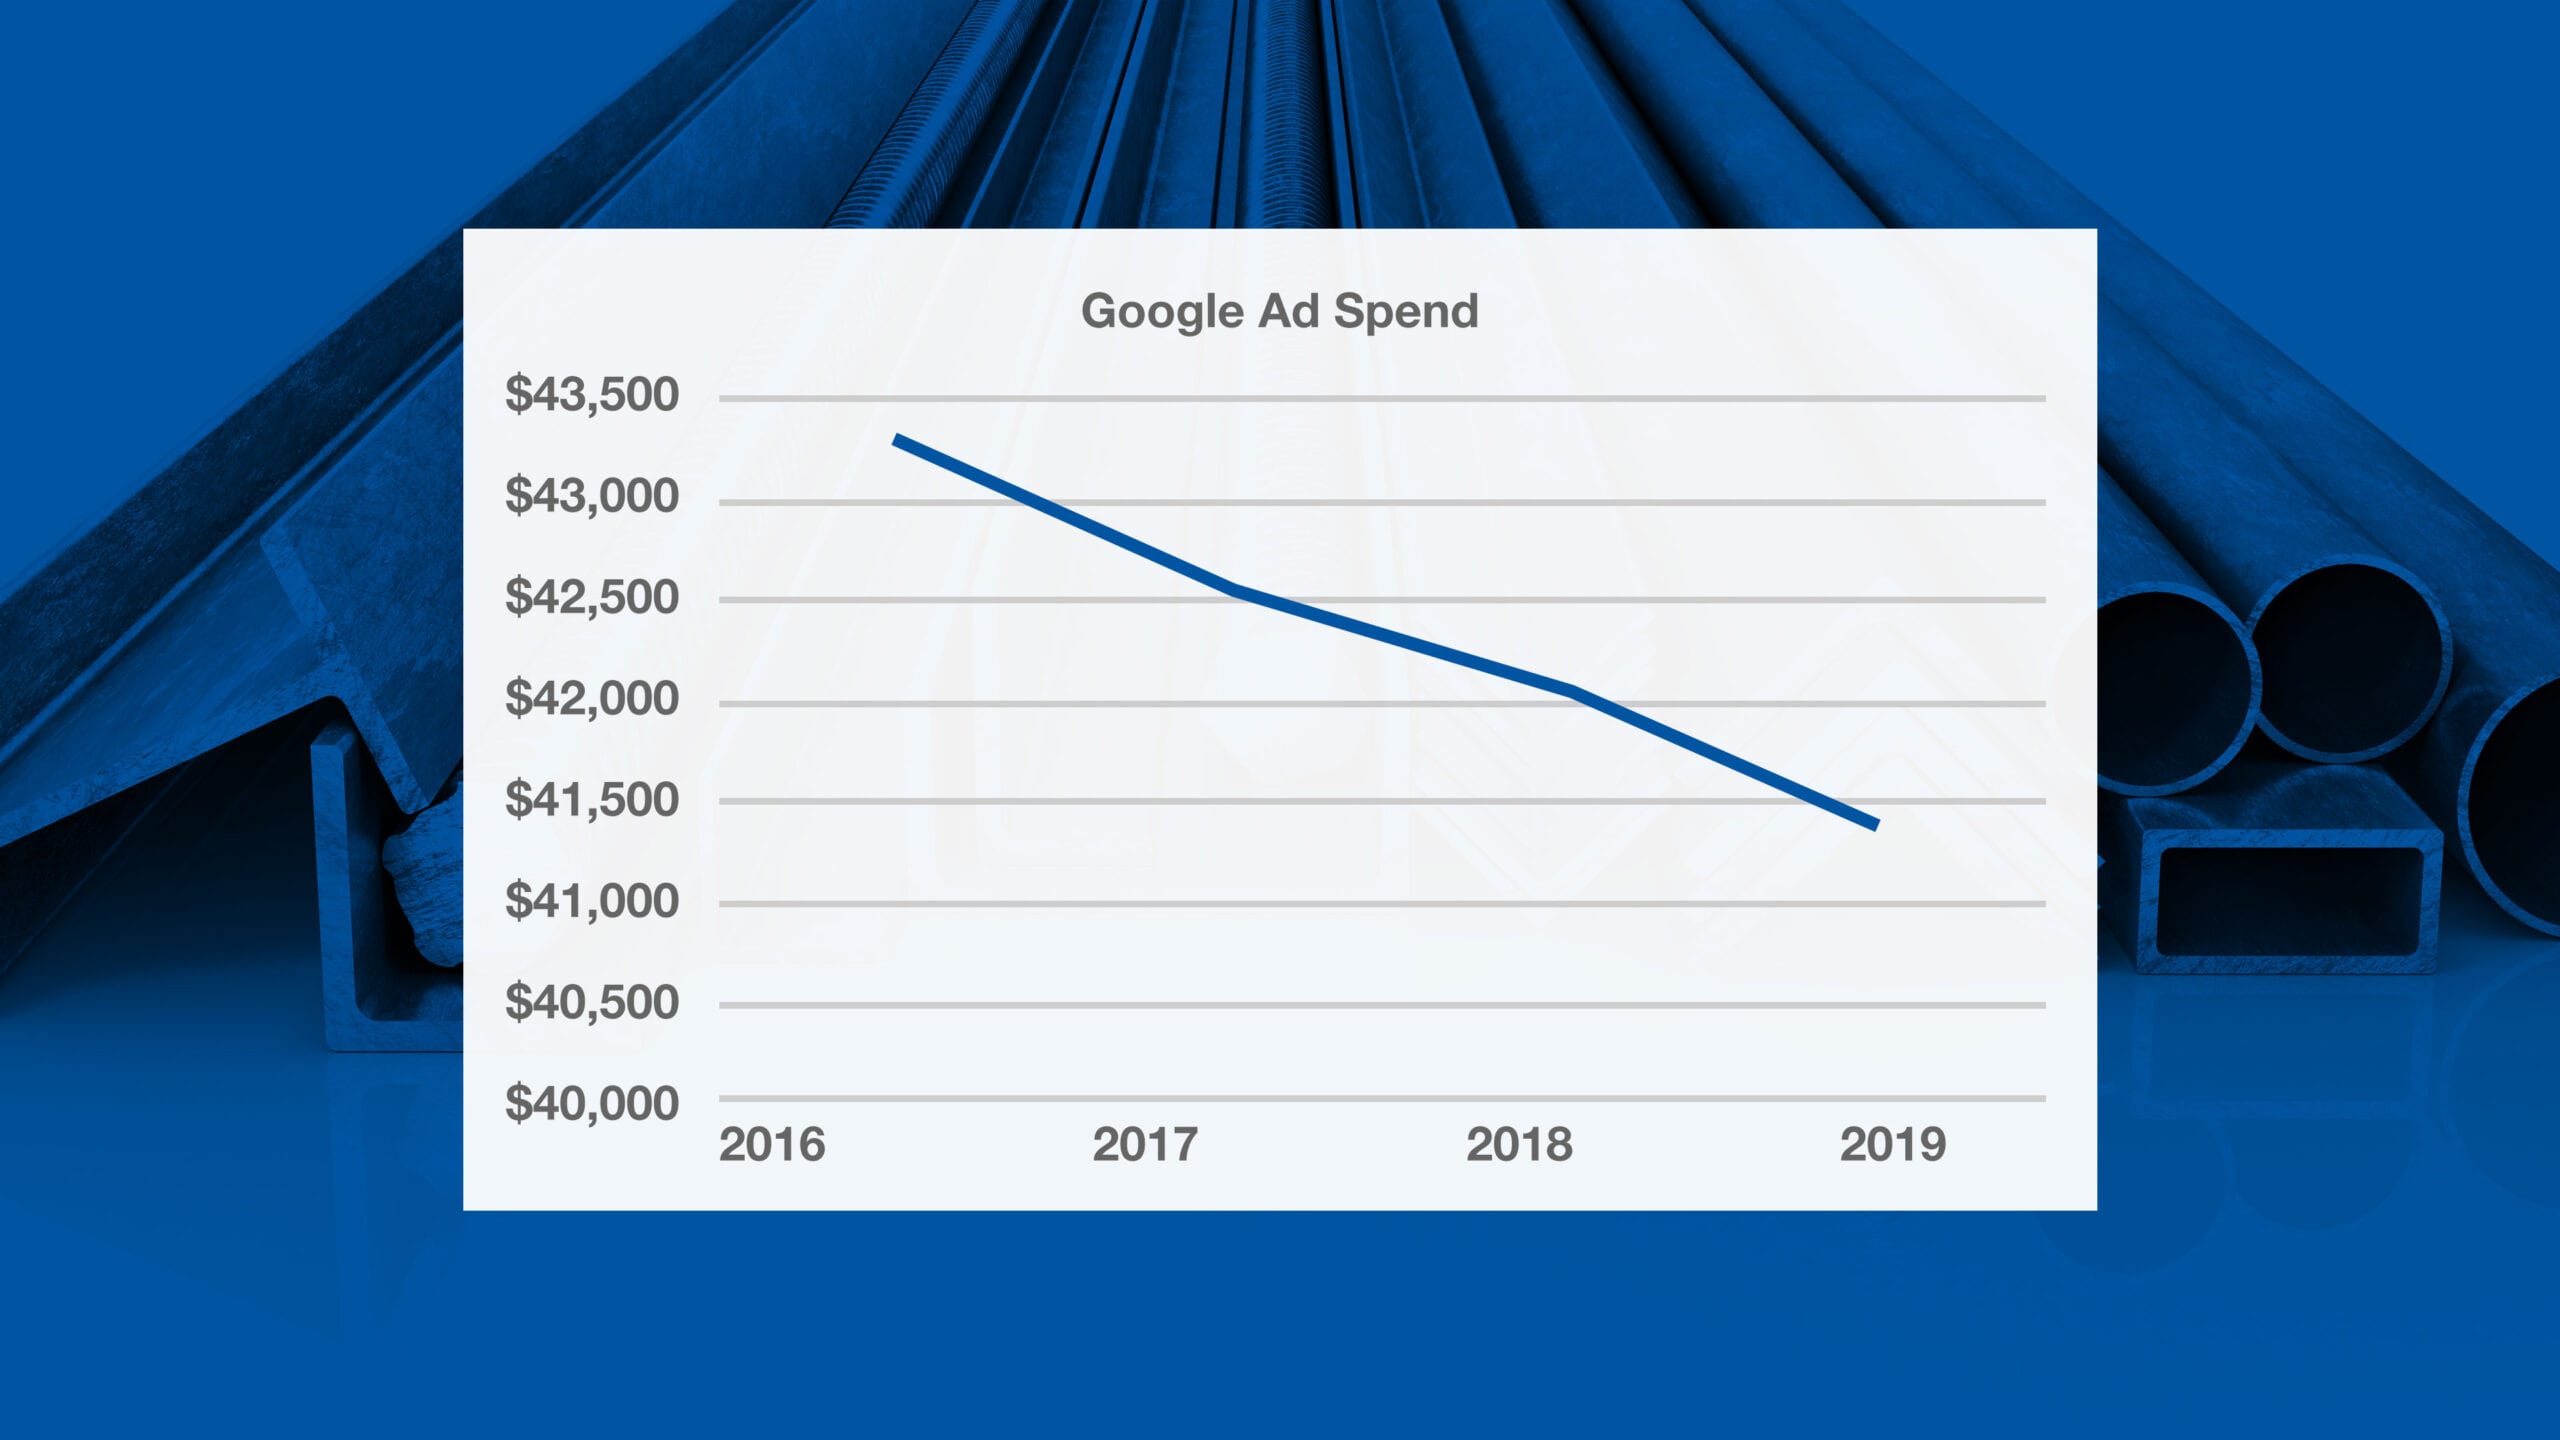 Line chart showing Google Ad Spend going down